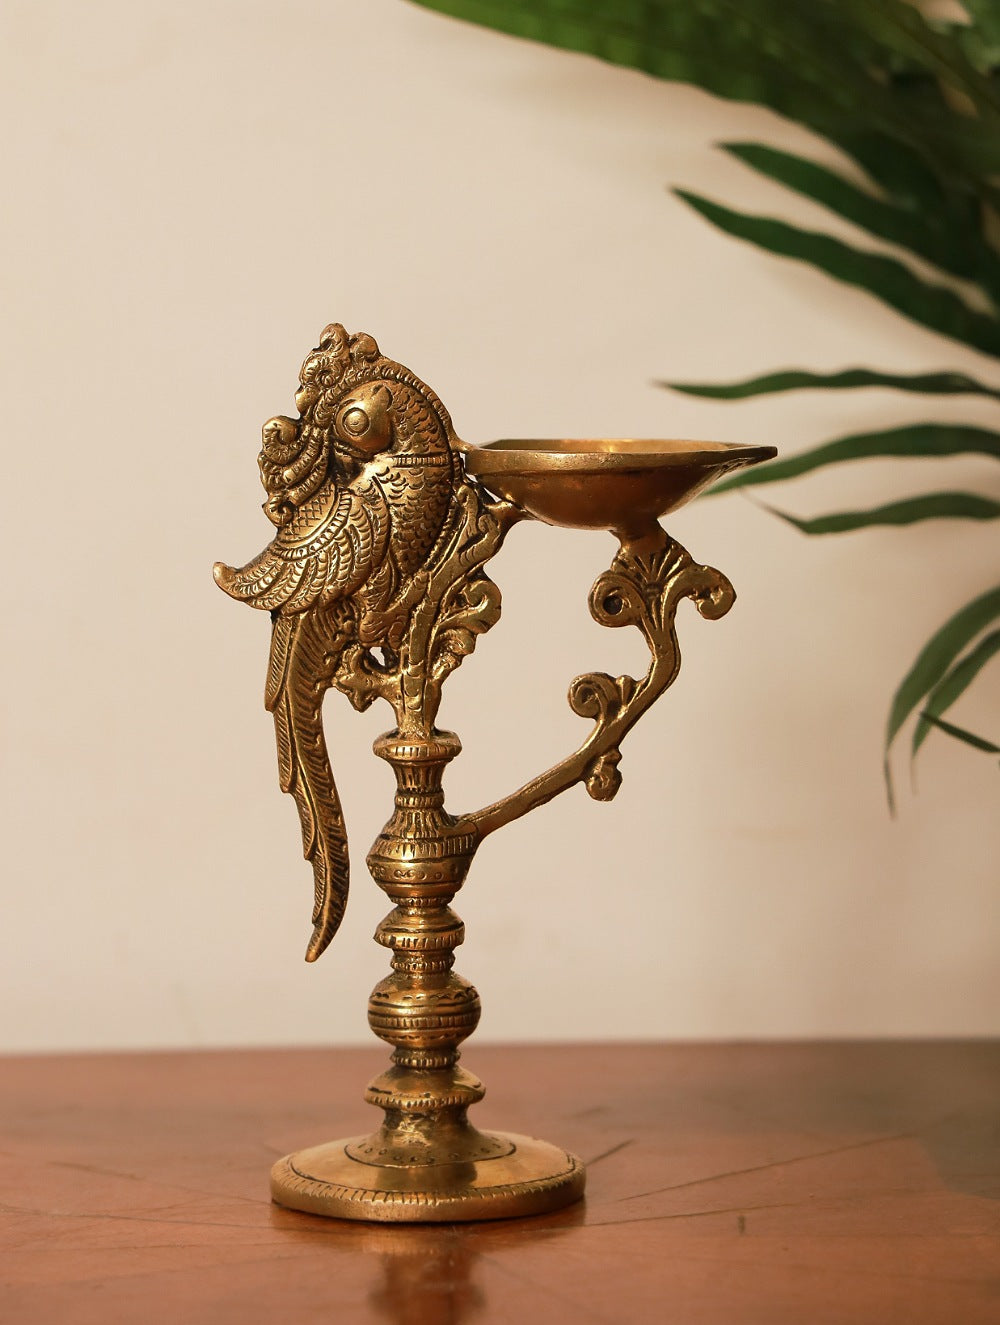 Buy Traditional Brass Oil Lamp -The Peacock Online